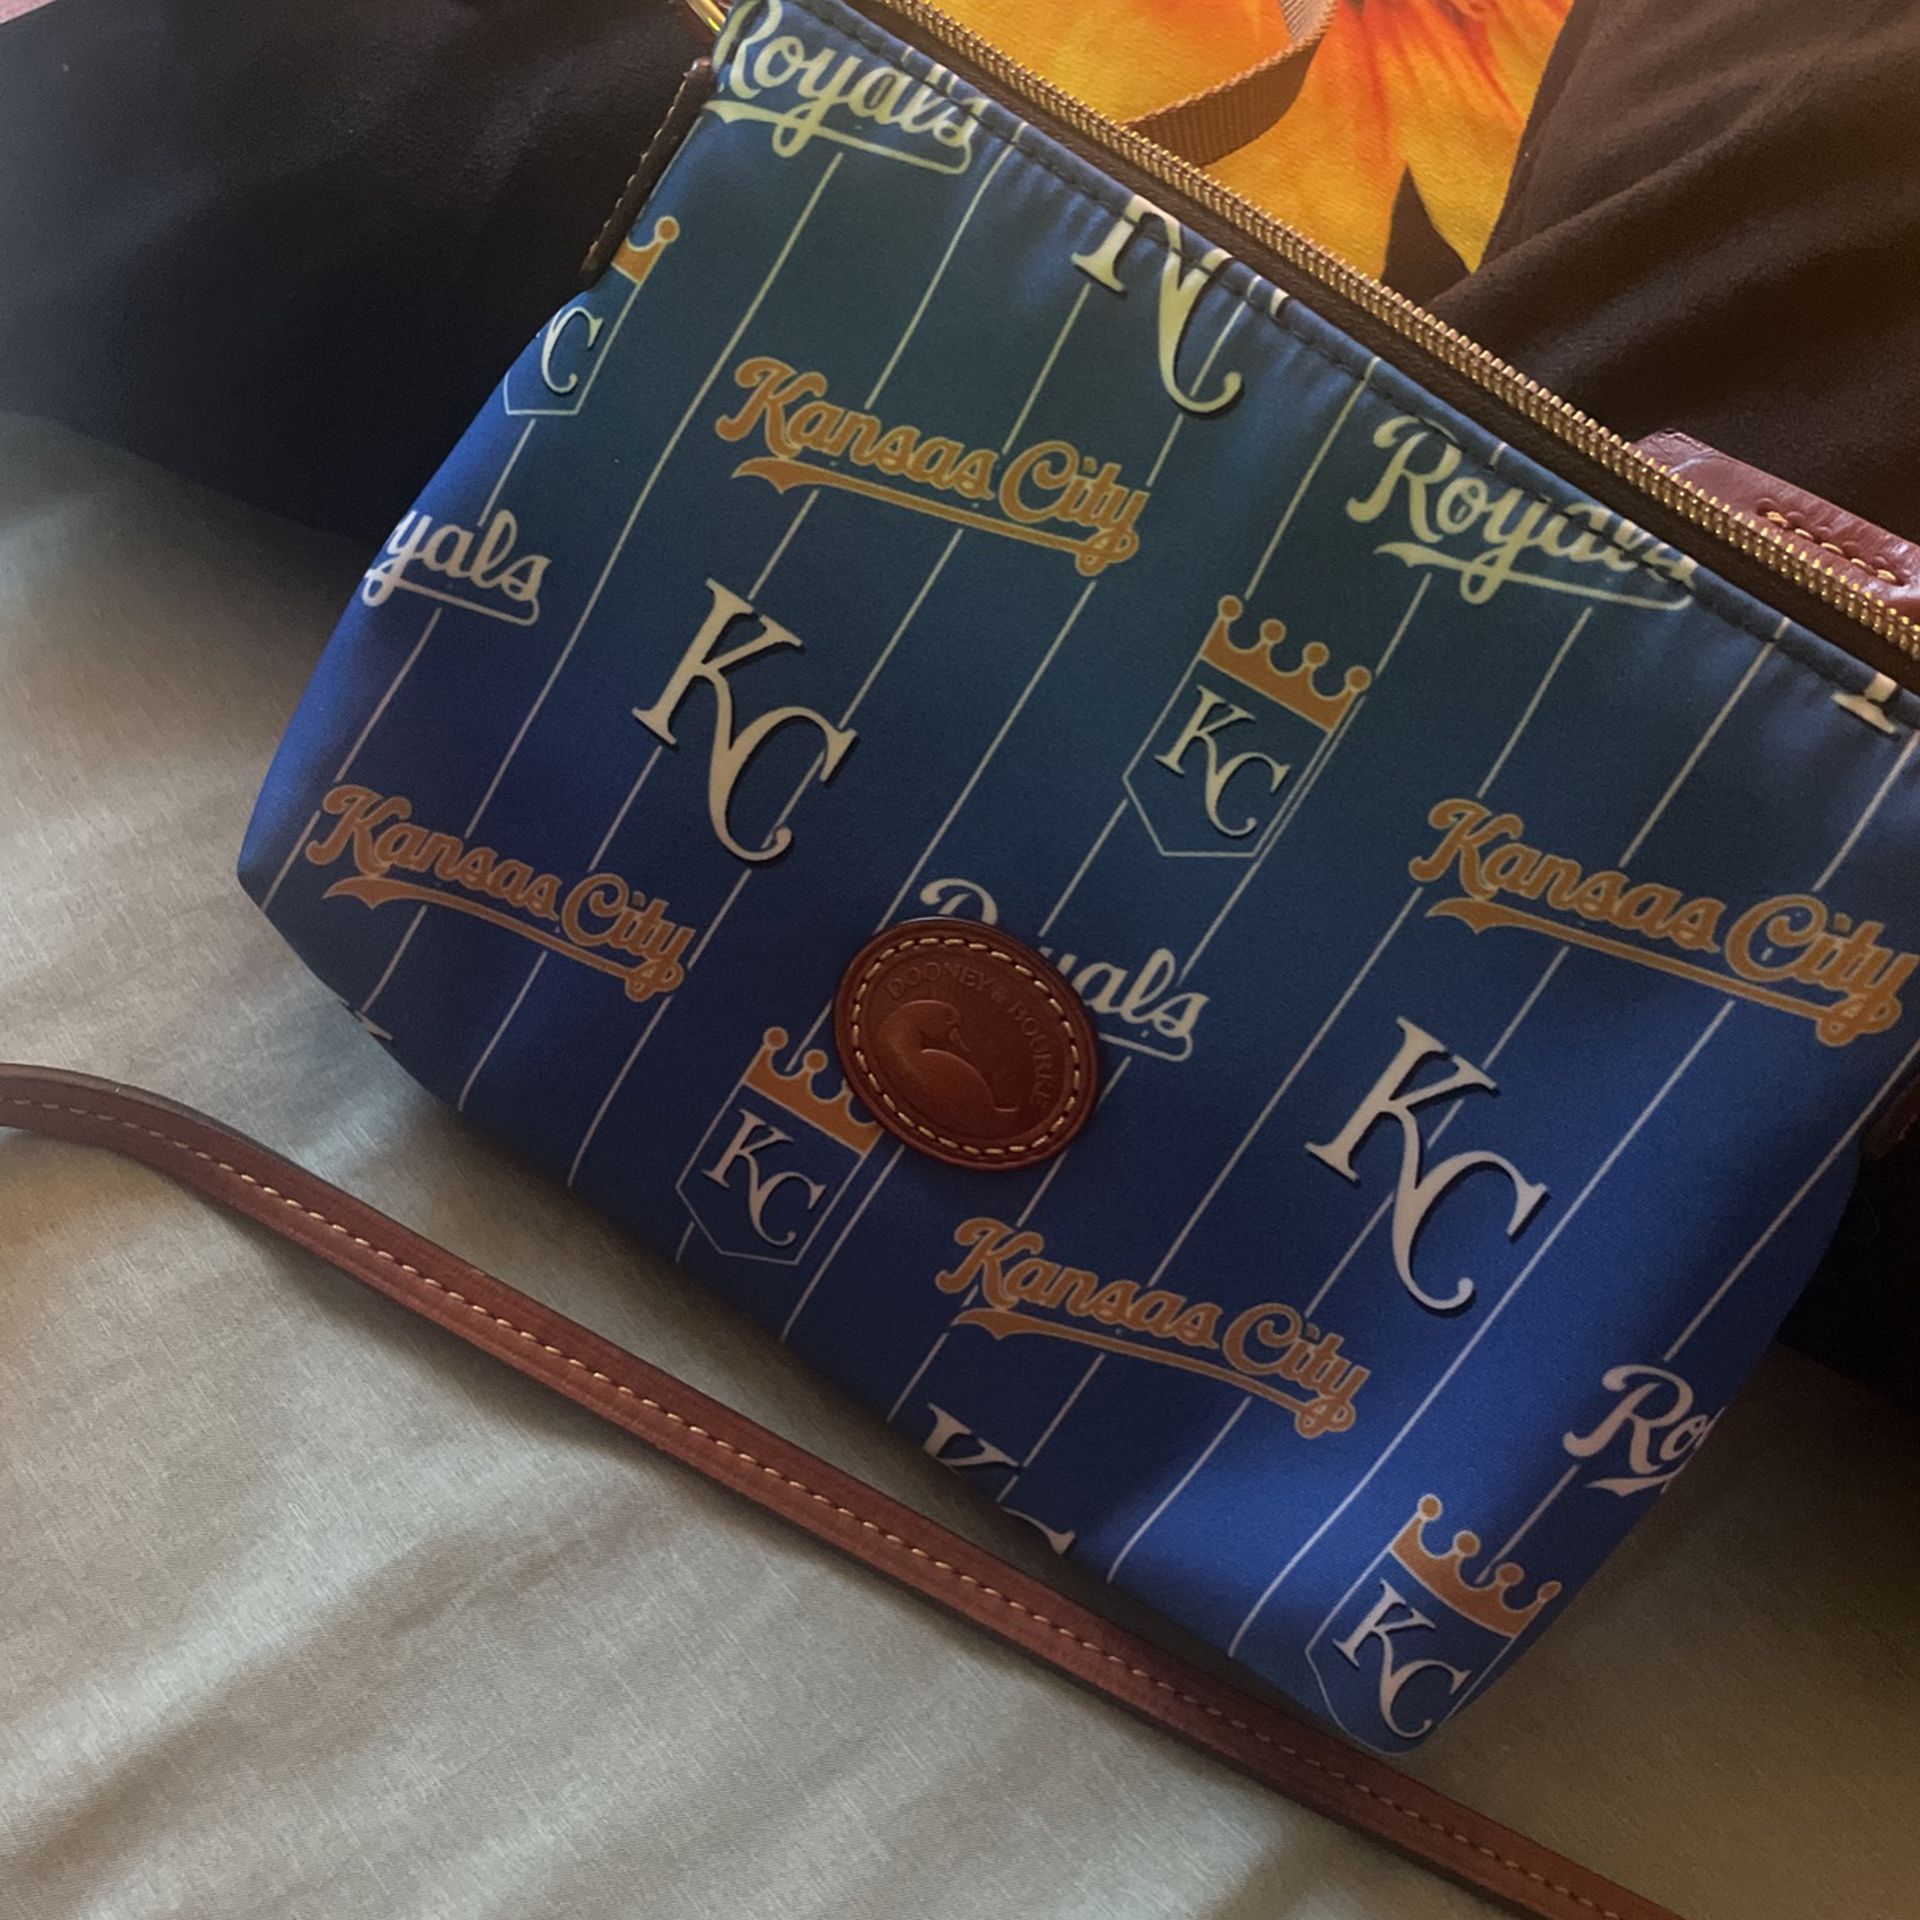 Louis Vuitton Sling Bag for Sale in Kansas City, MO - OfferUp